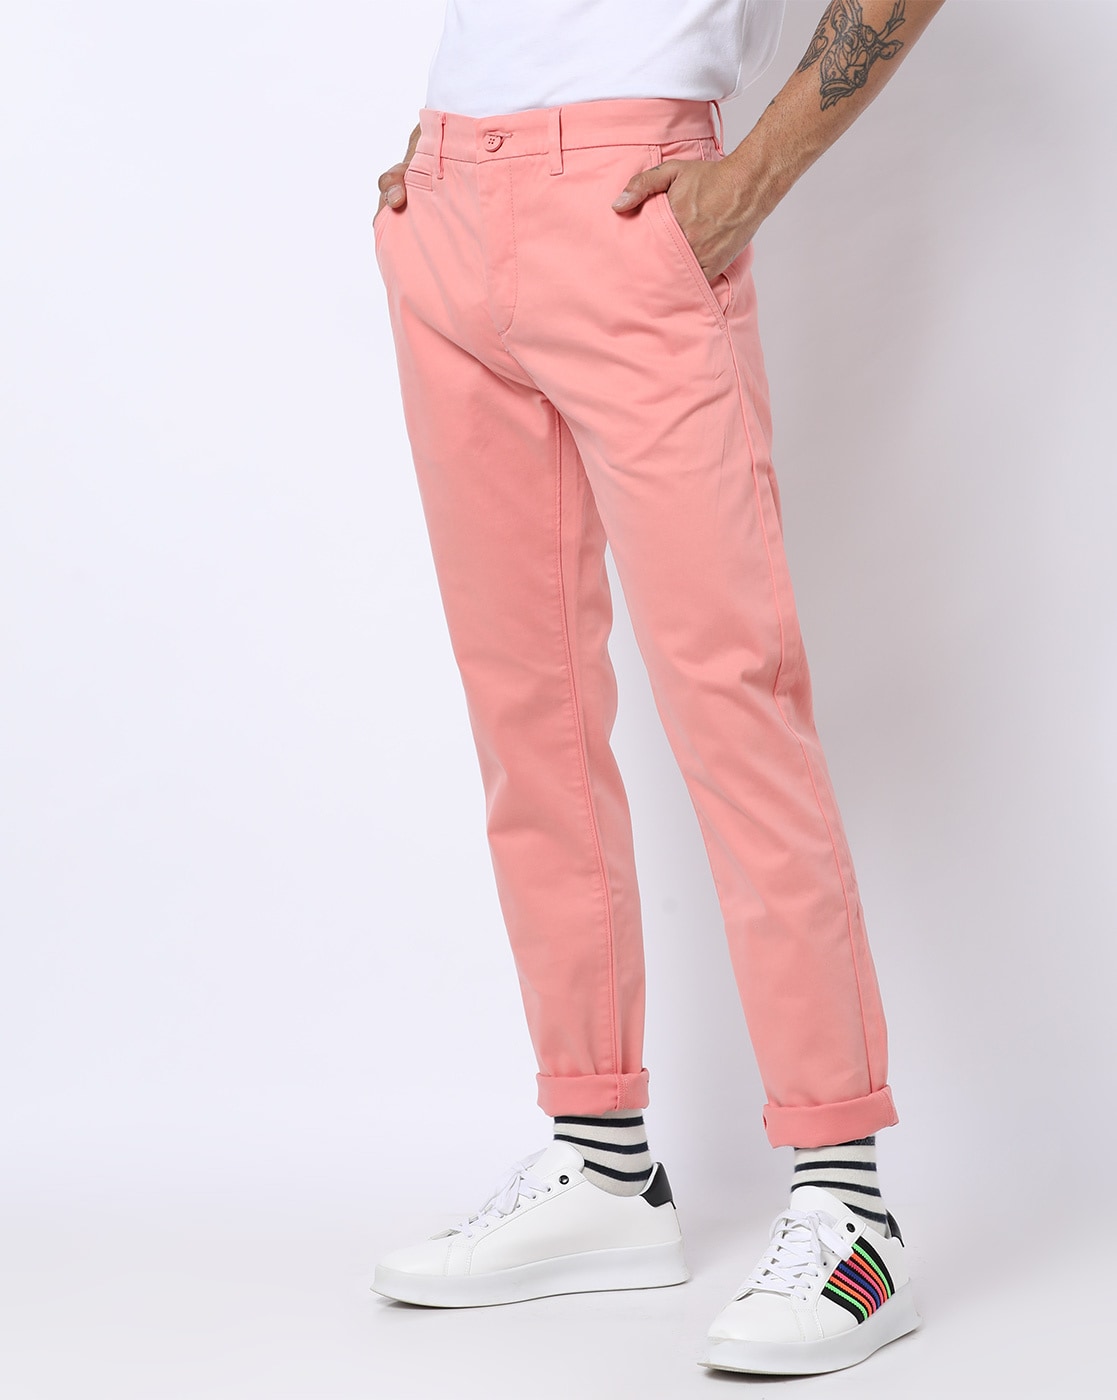 Buy Pink Trousers & Pants for Men by LEVIS Online 